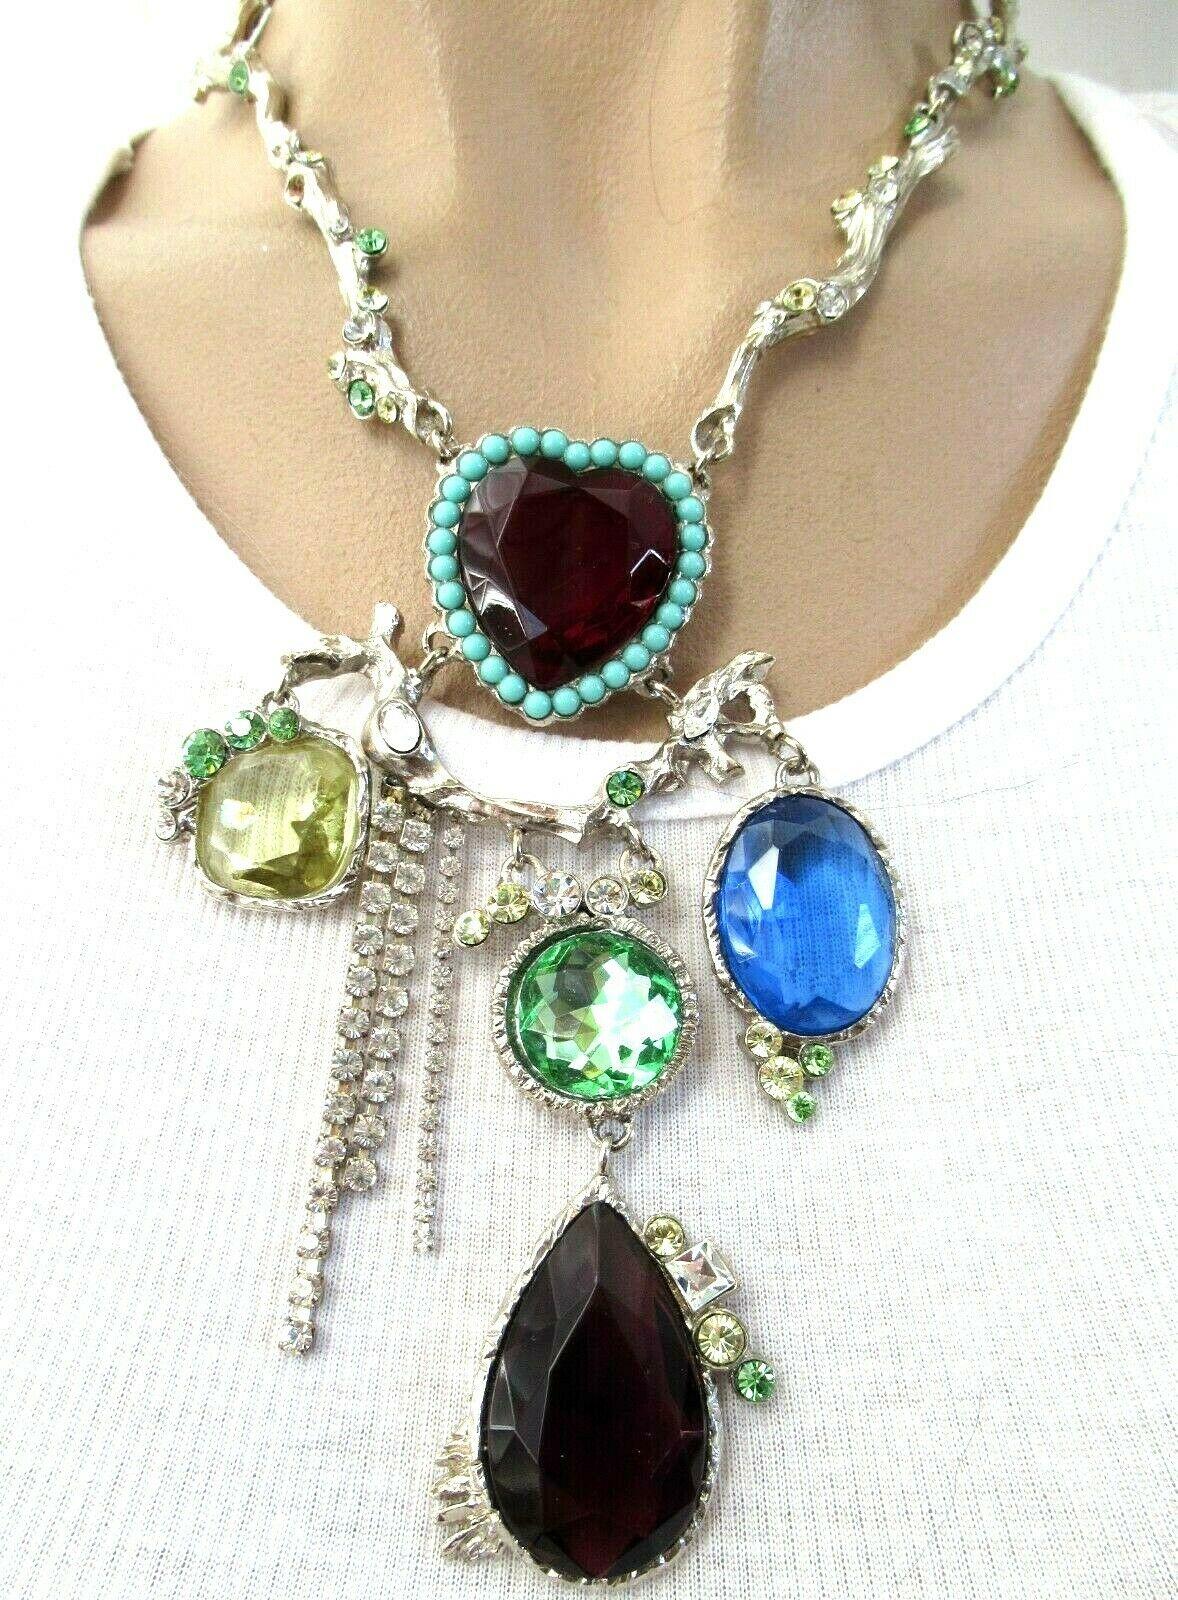 Modernist Designer Christian Lacroix Signed Jeweled Heart Multi Charm Statement Necklace For Sale